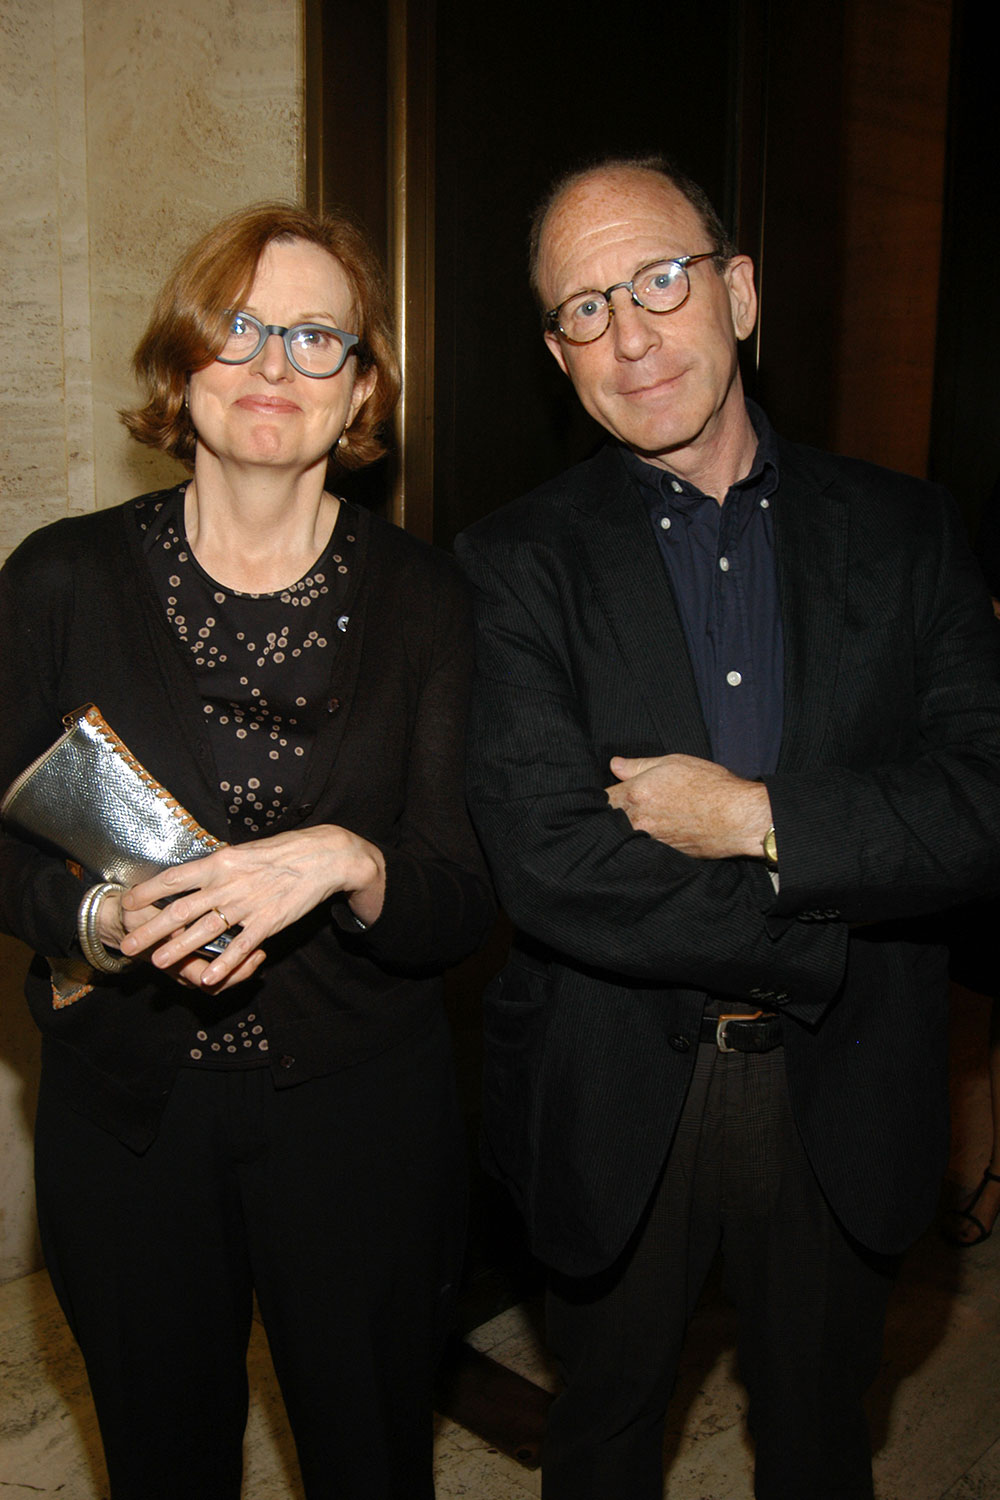 New York Times co-chief art critic Roberta Smith and her husband Jerry Saltz, senior art critic for New York magazine, were both among the most influential critics noted by survey respondents